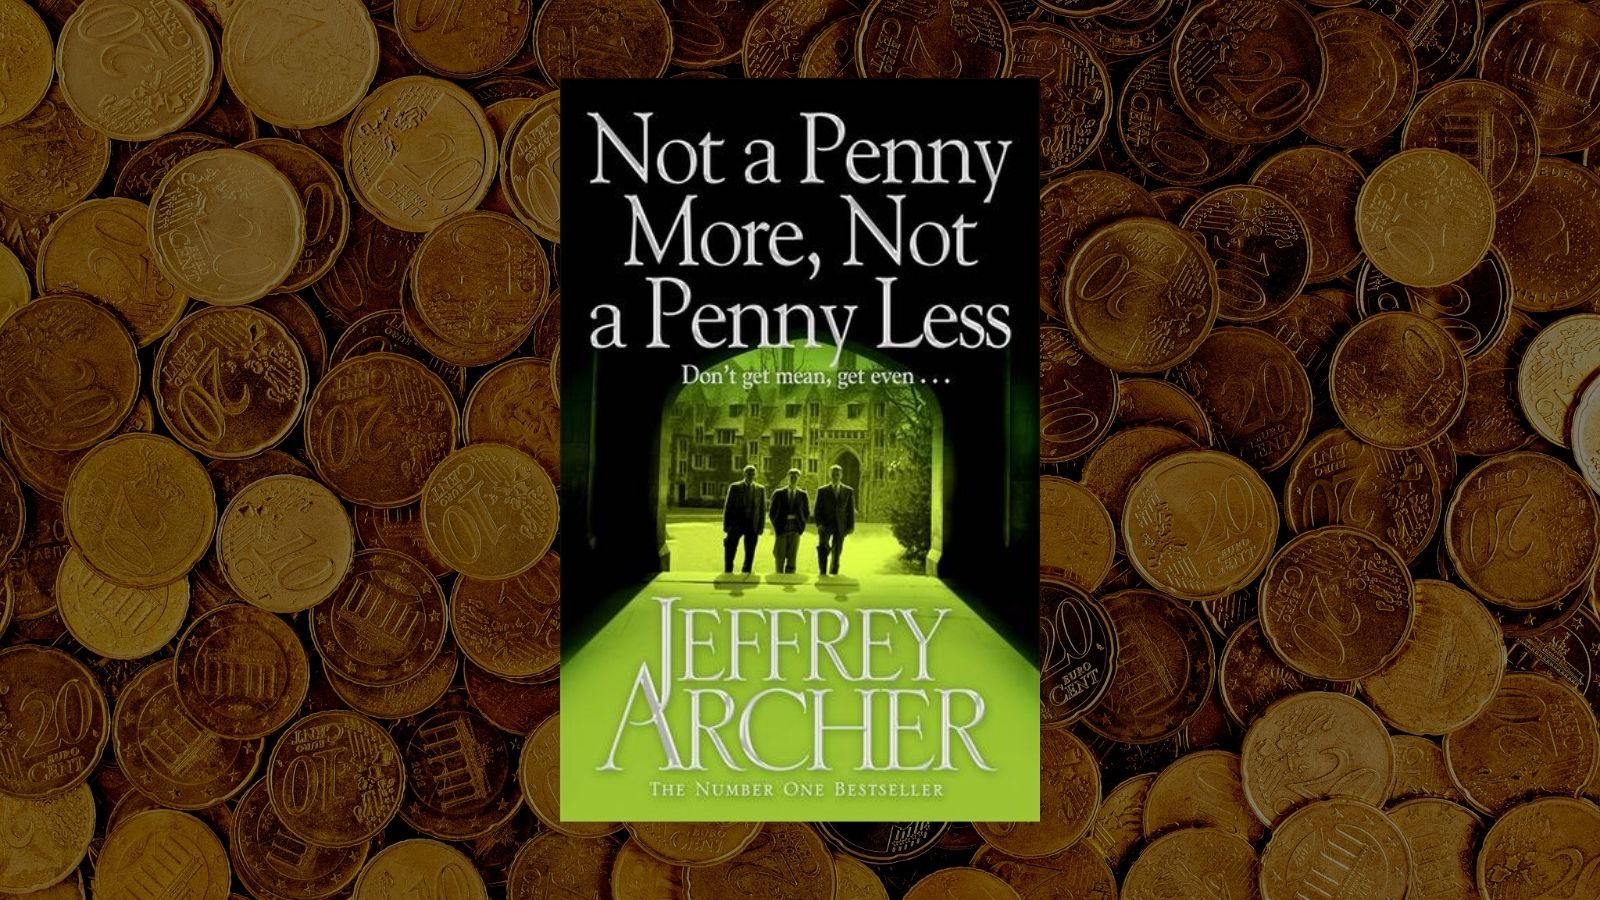 Not A Penny More, Not A Penny Less by Jeffrey Archer